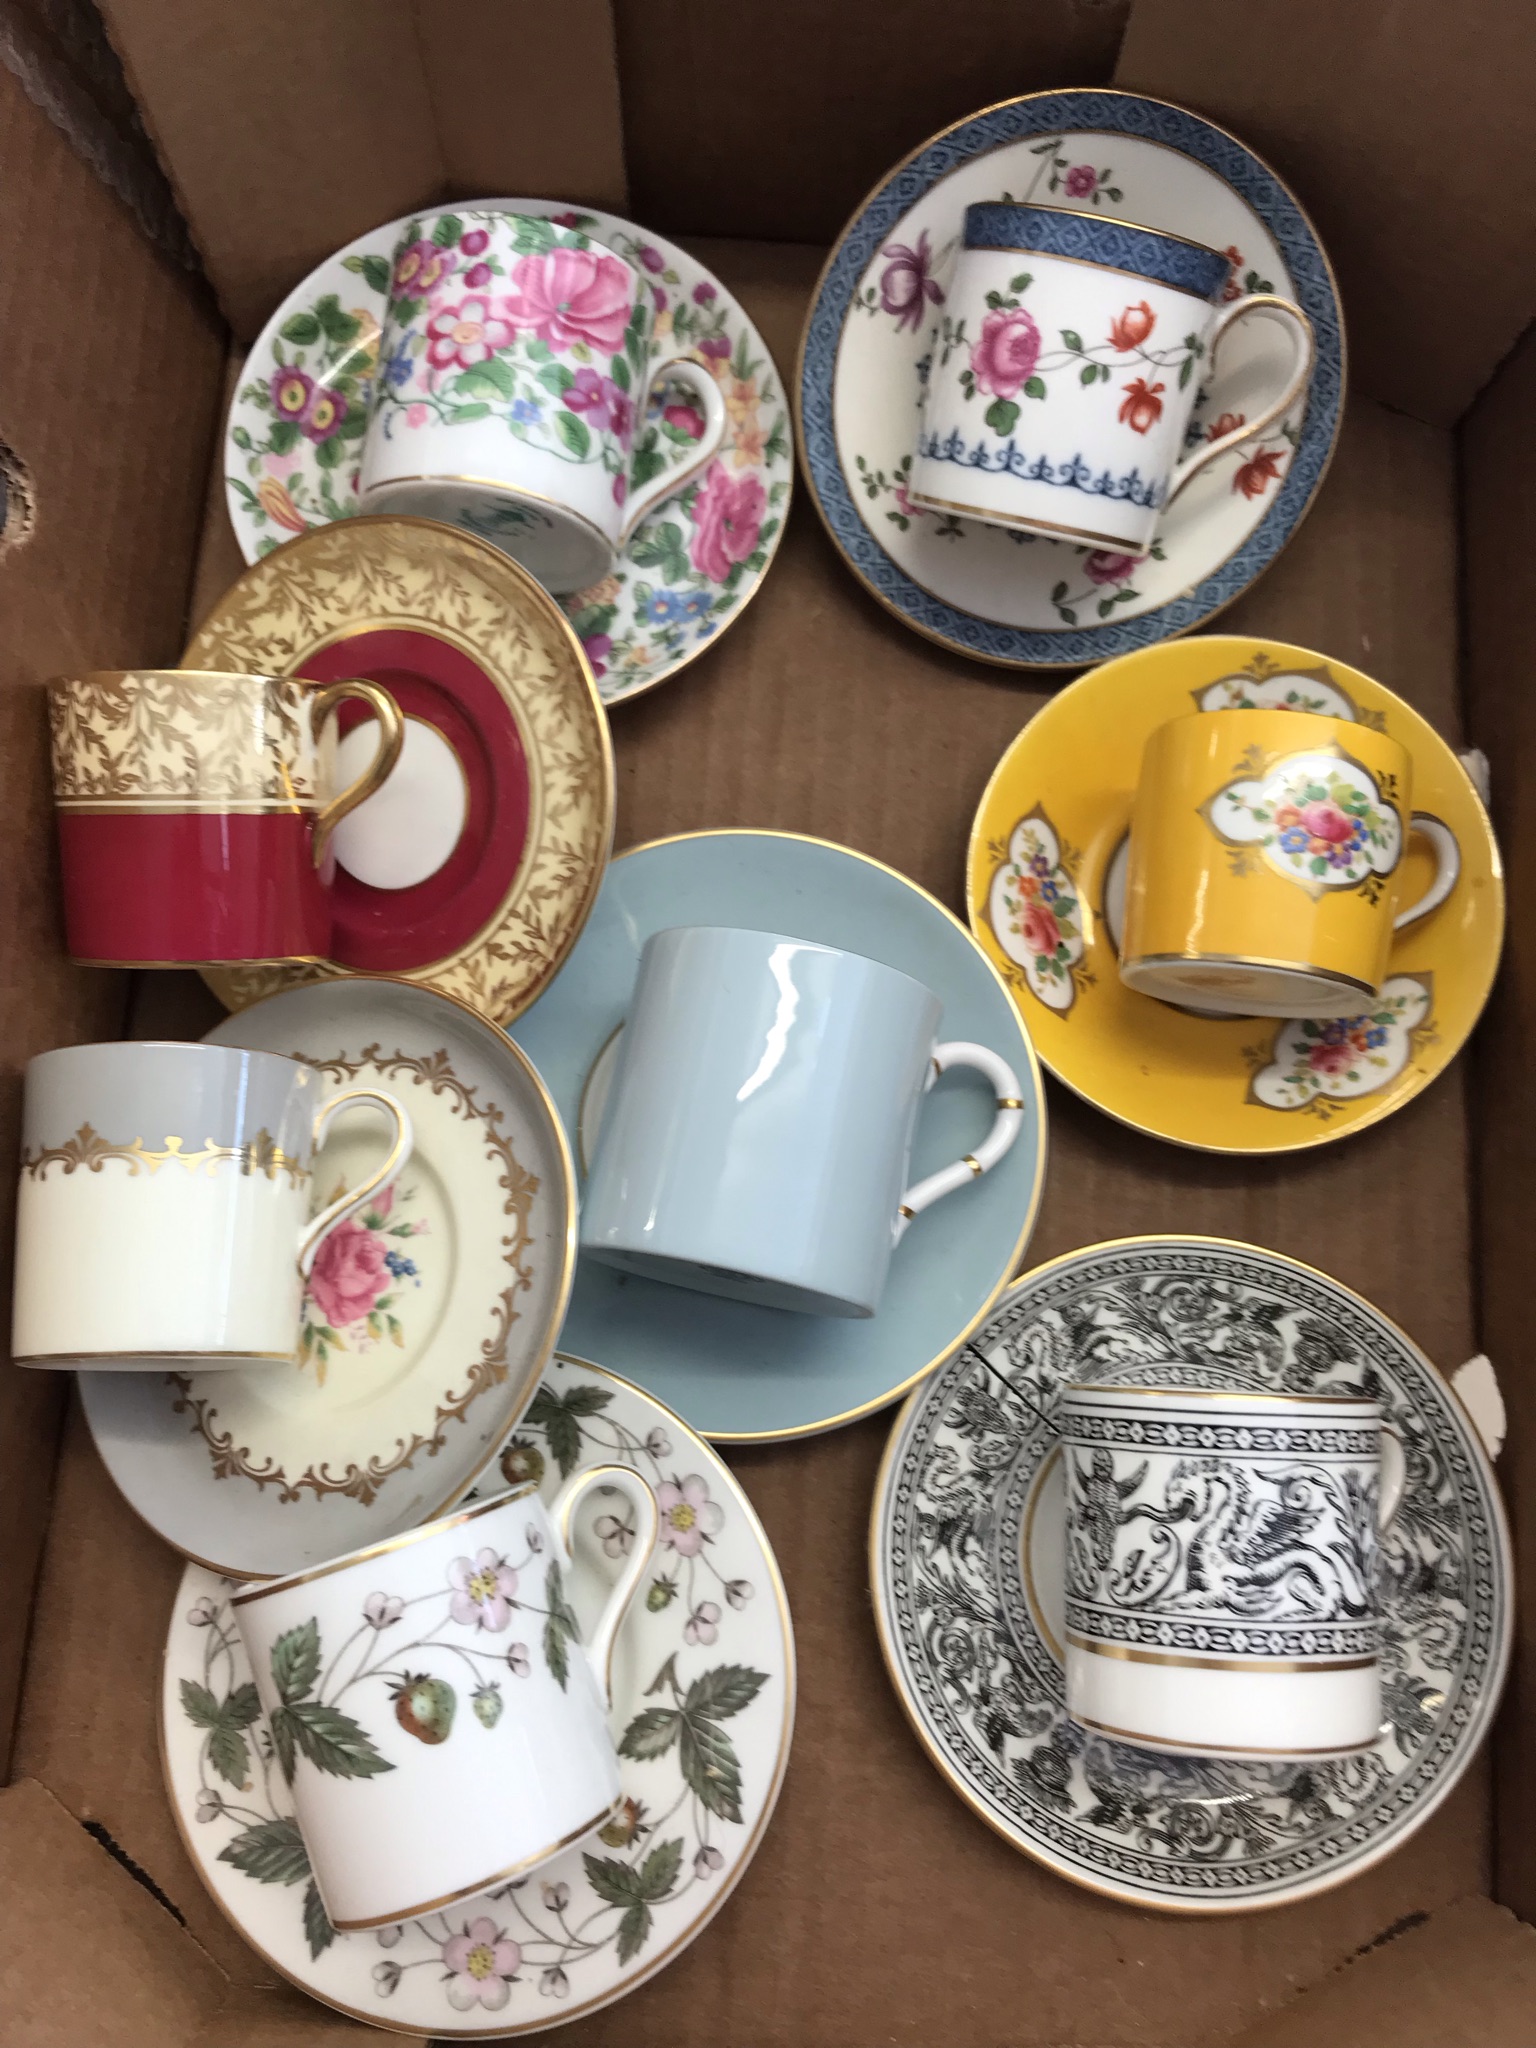 8 different Miniature bone china coffee cups and saucer sets (one Wedgwood saucer is very cracked)